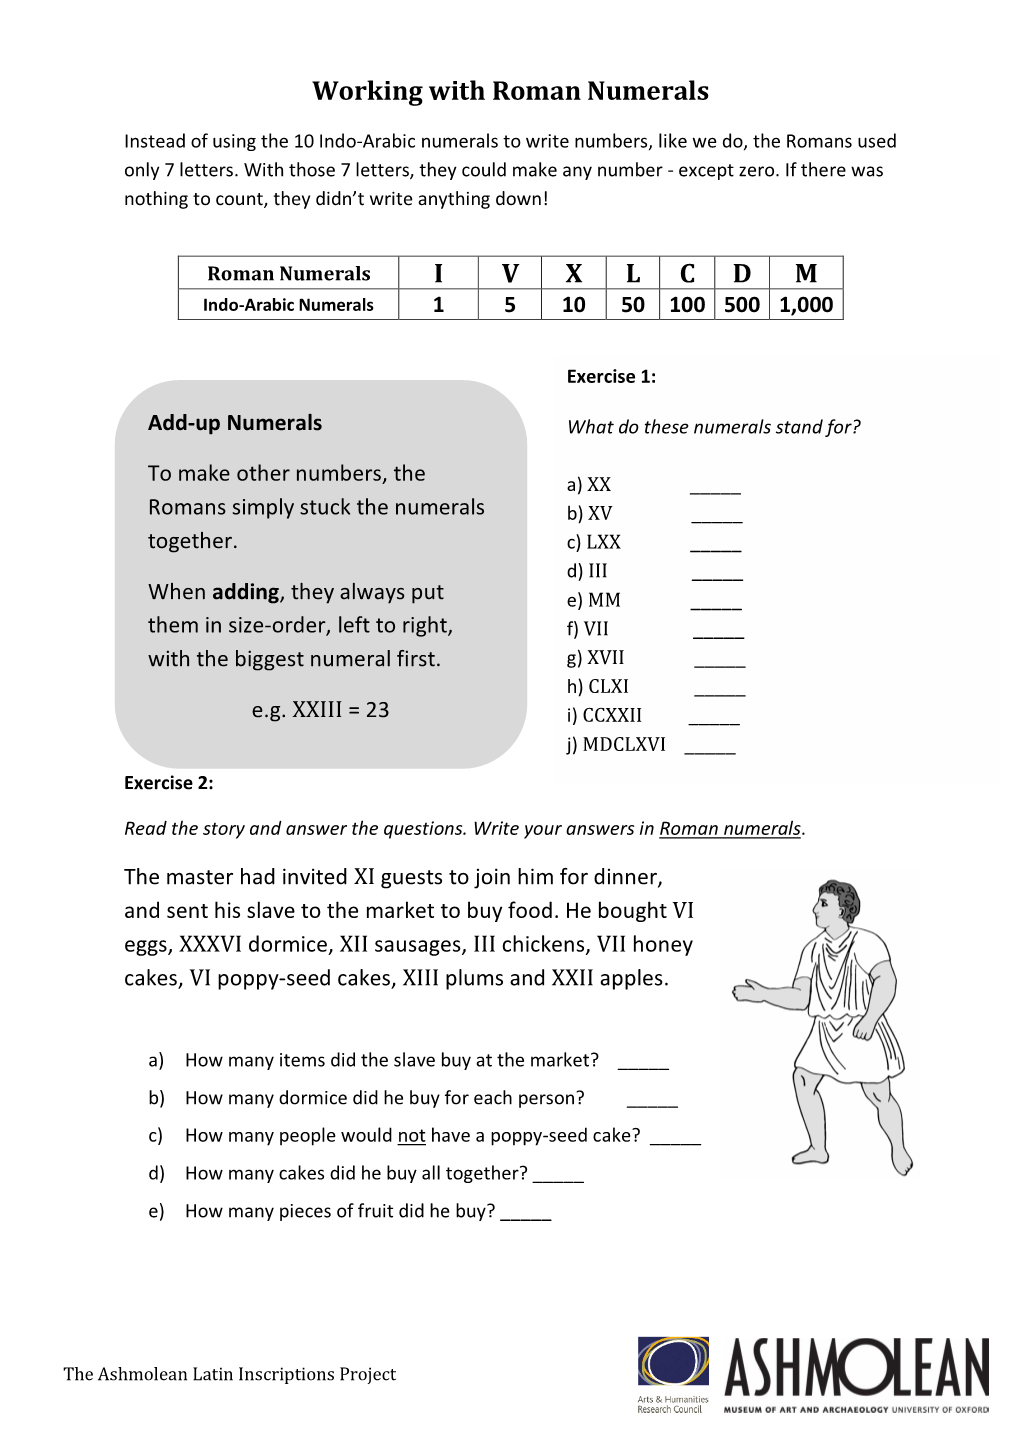 Working with Roman Numerals – WORKSHEET